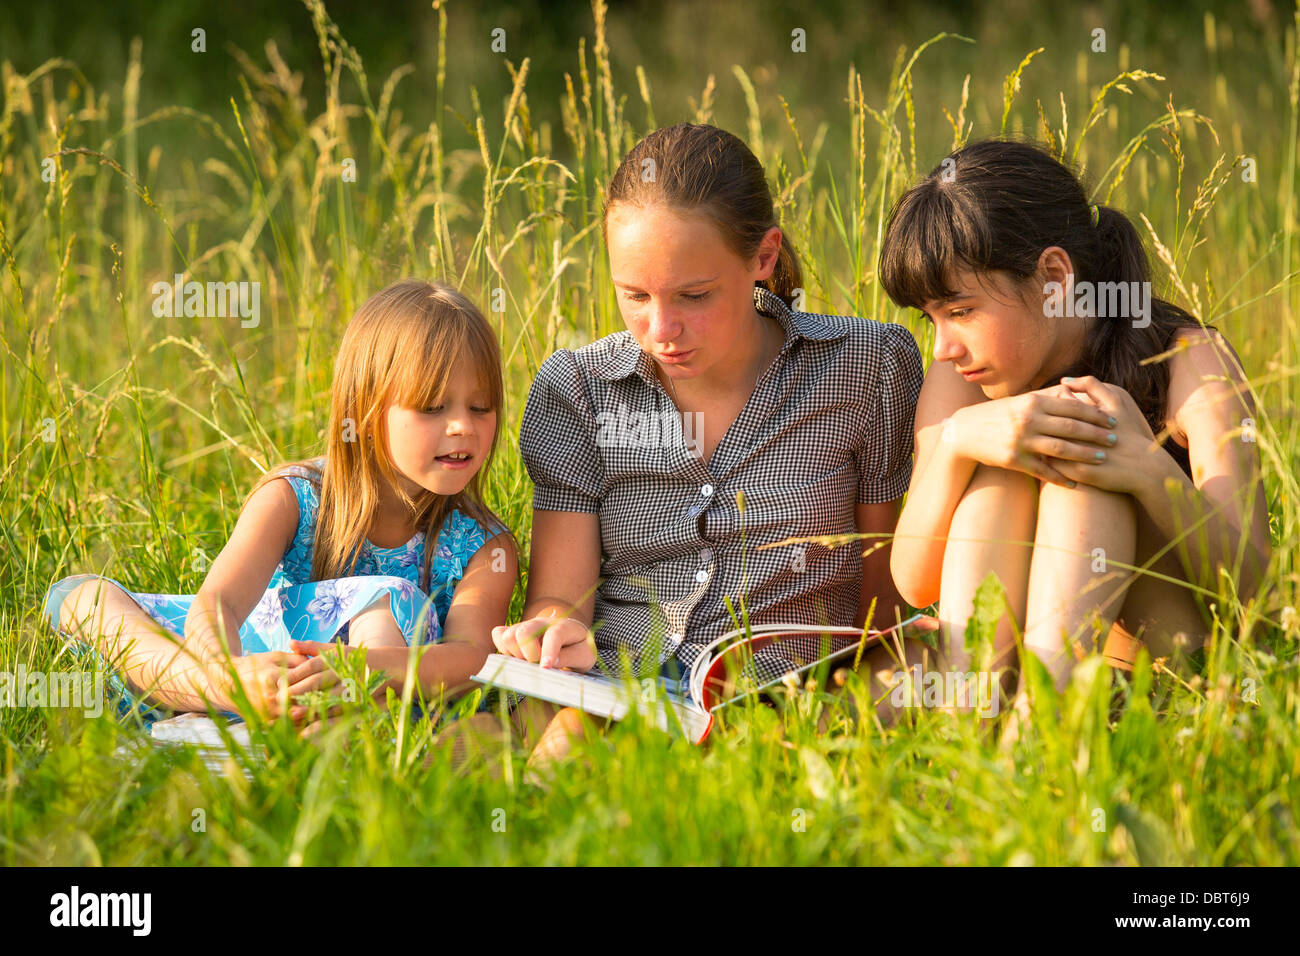 Three cute little girls reading book in natural environment together. Stock Photo